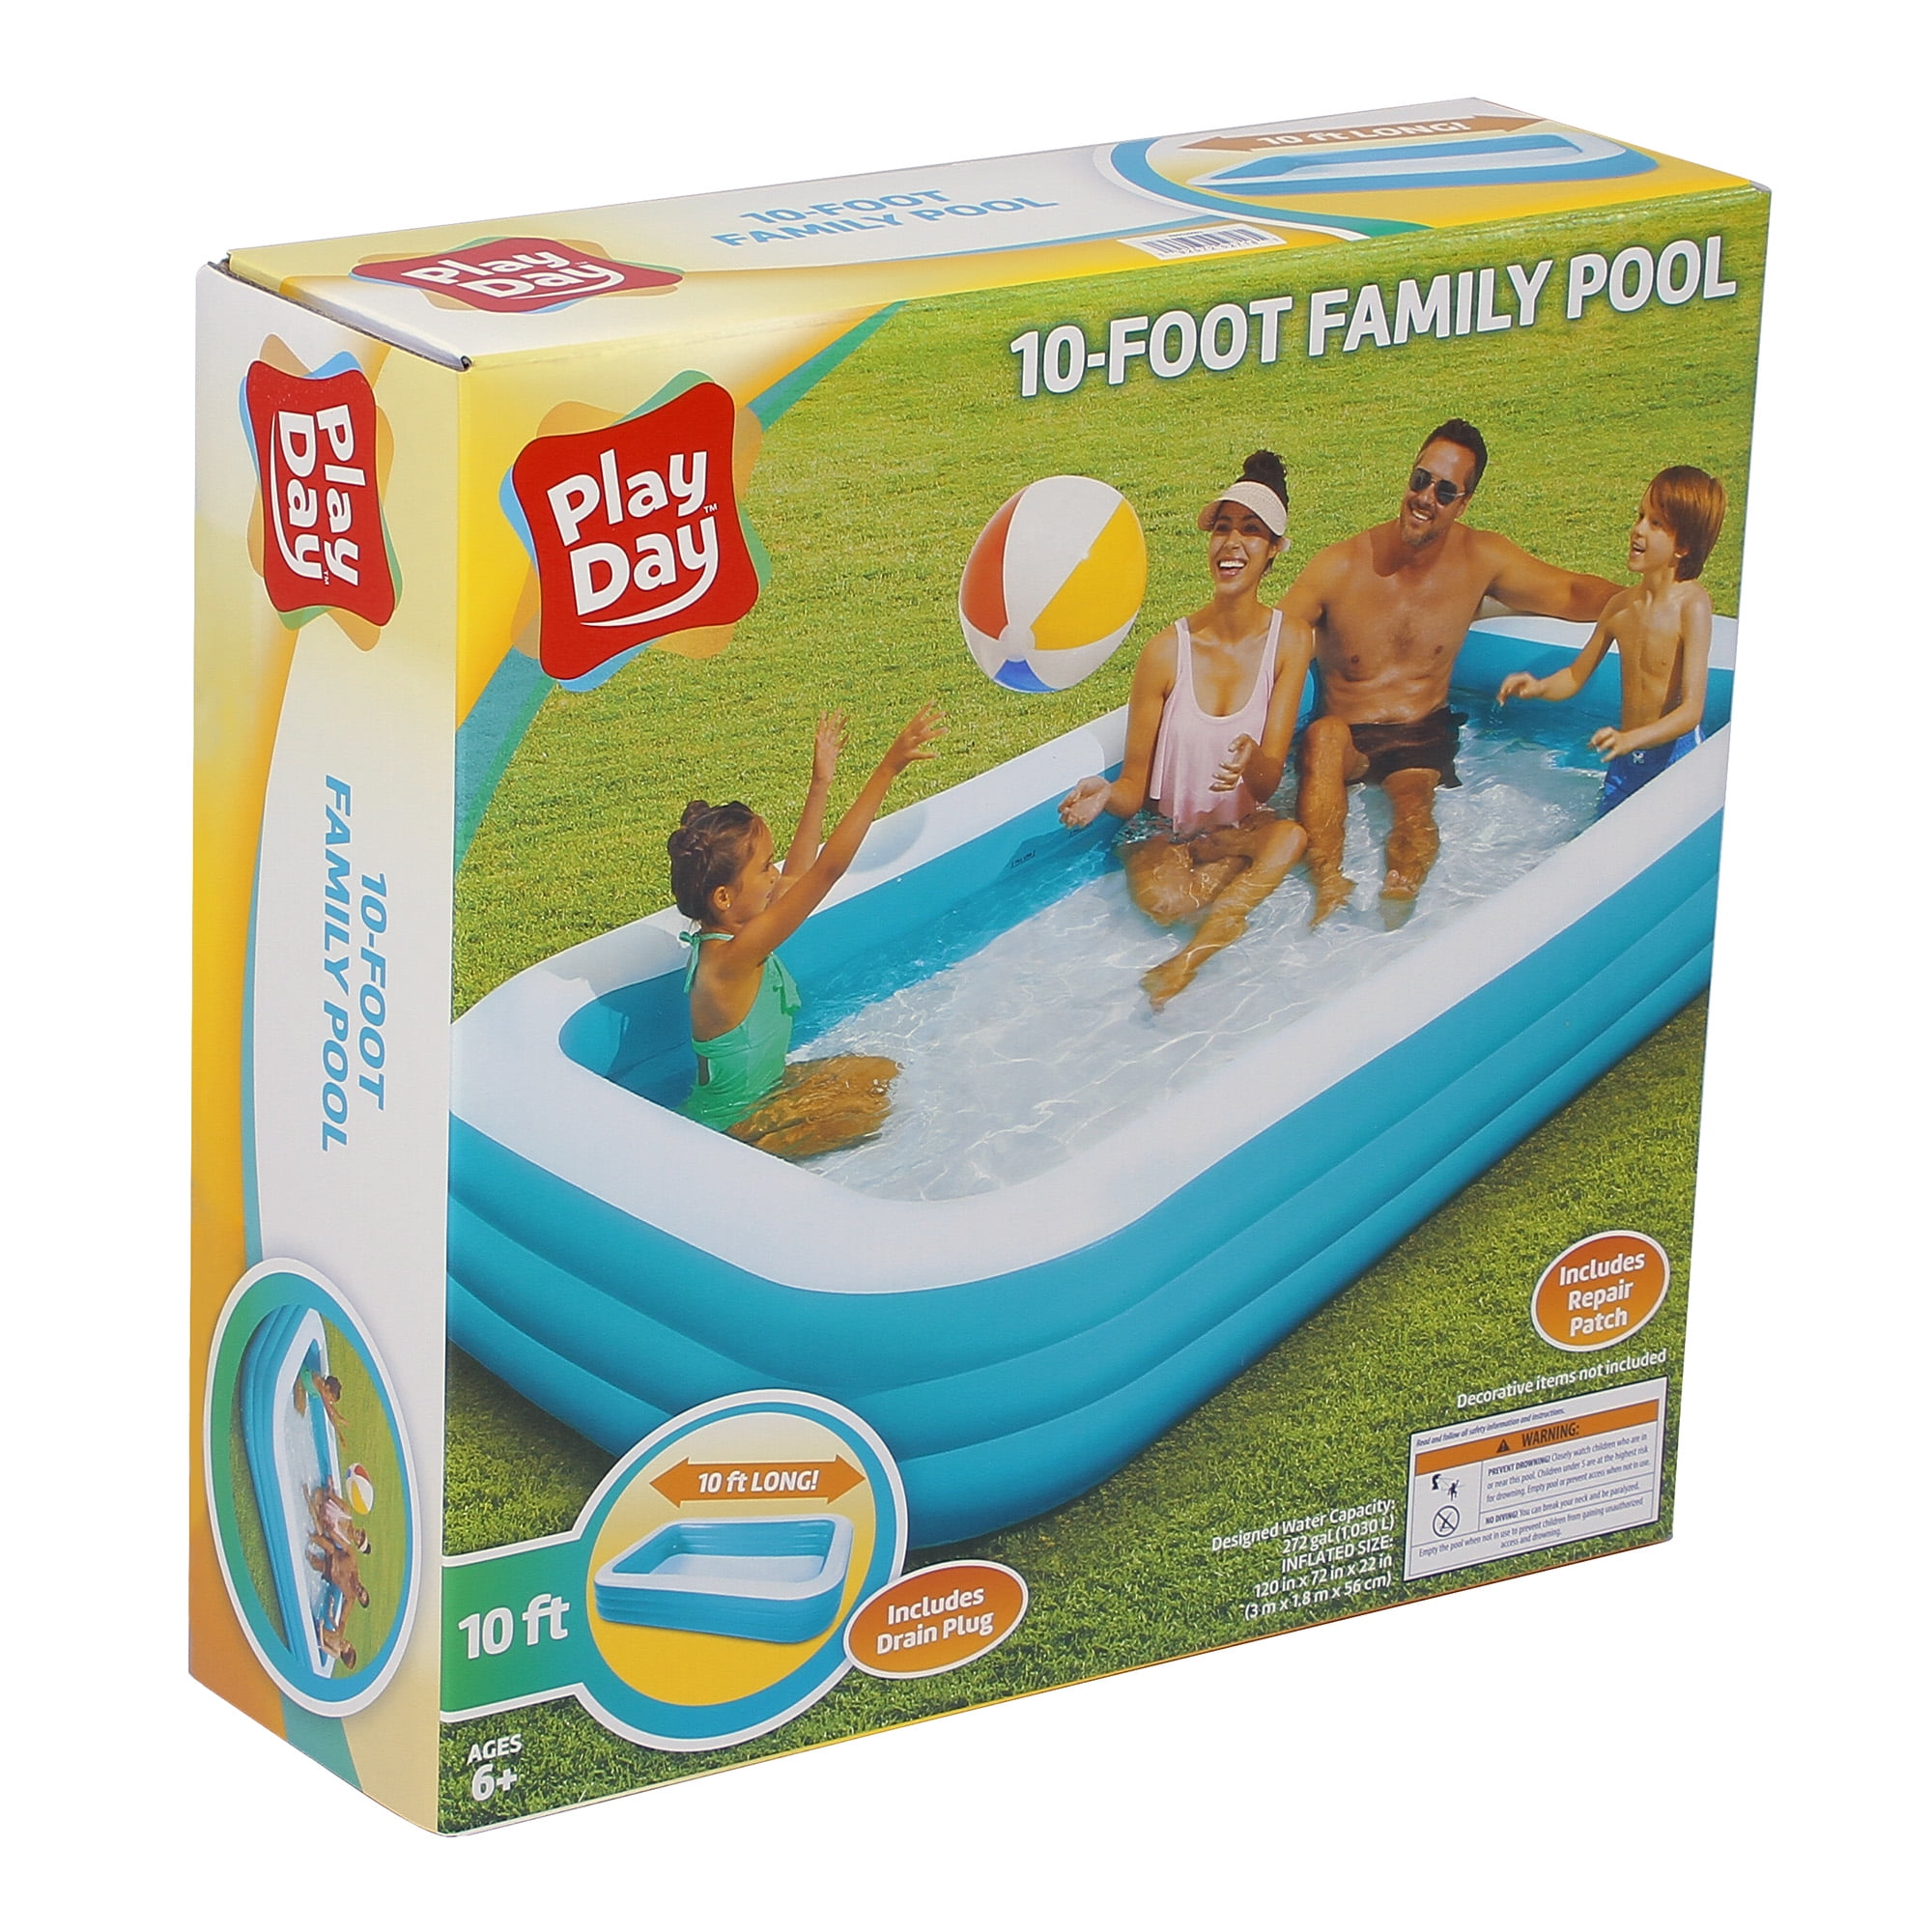 120/" x 72/" x 22 Play Day Rectangular Inflatable Family Pool BRAND NEW!!